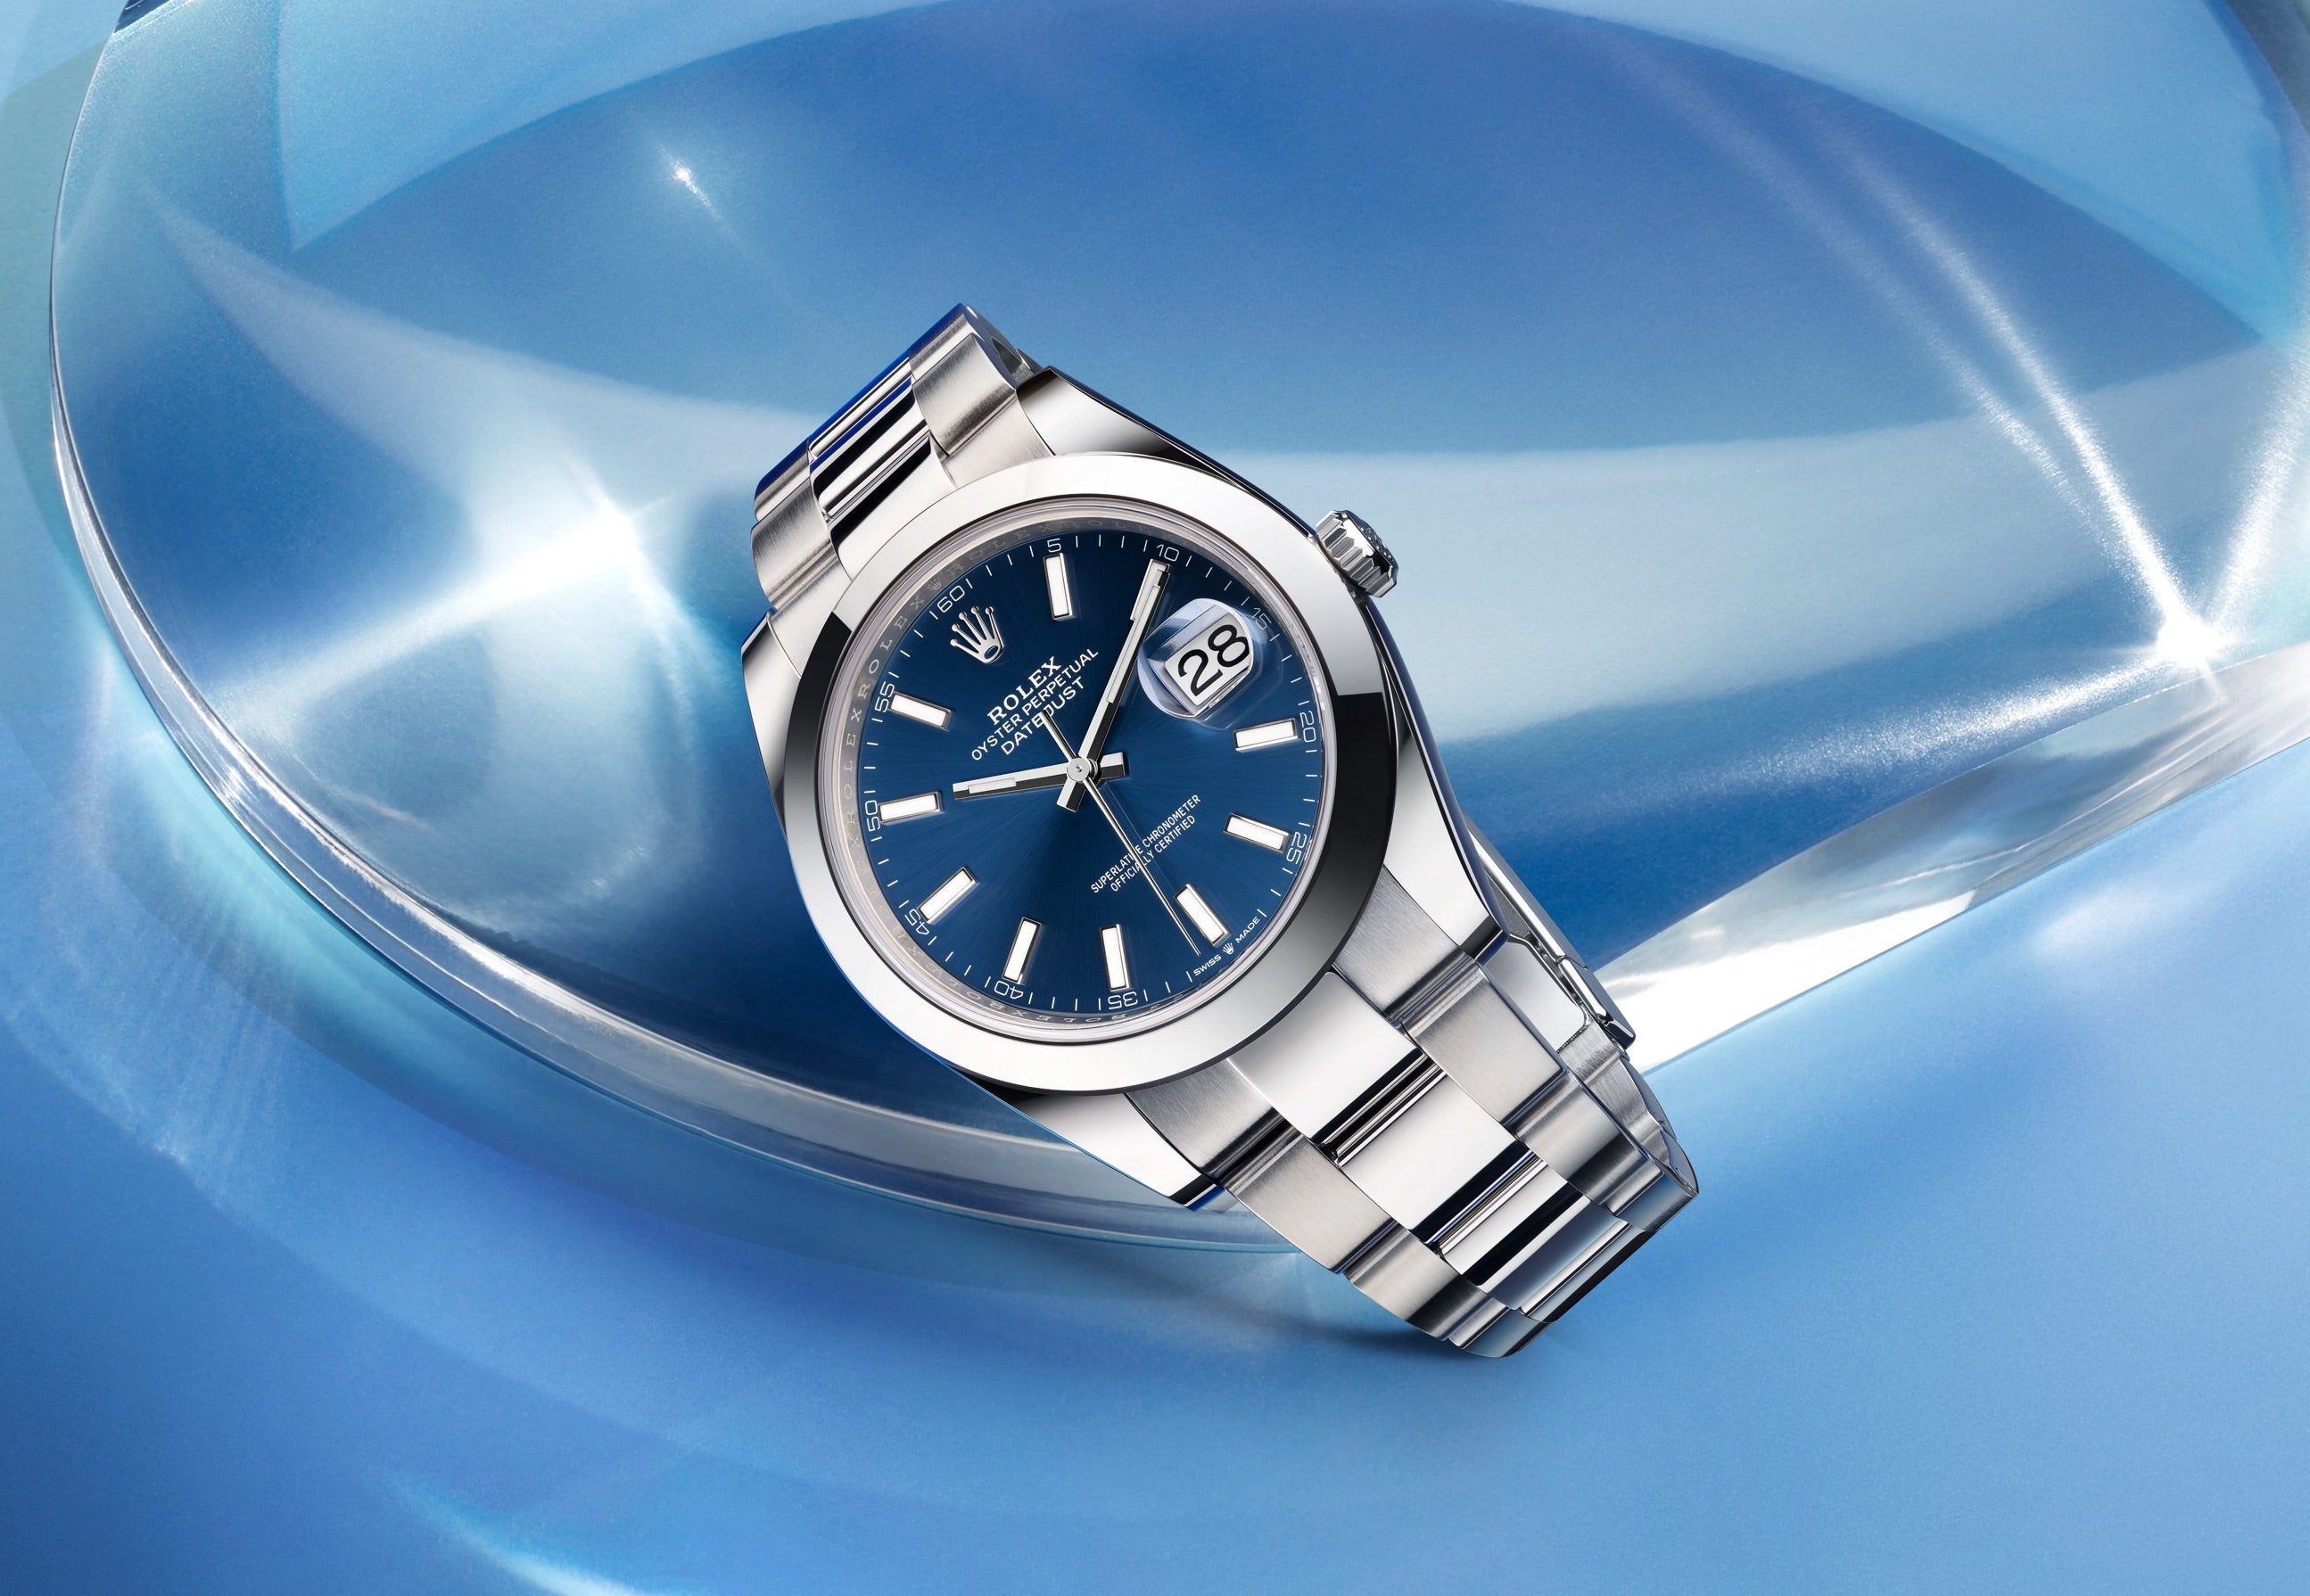 Rolex Datejust on Blue Background at Fink's Jewelers